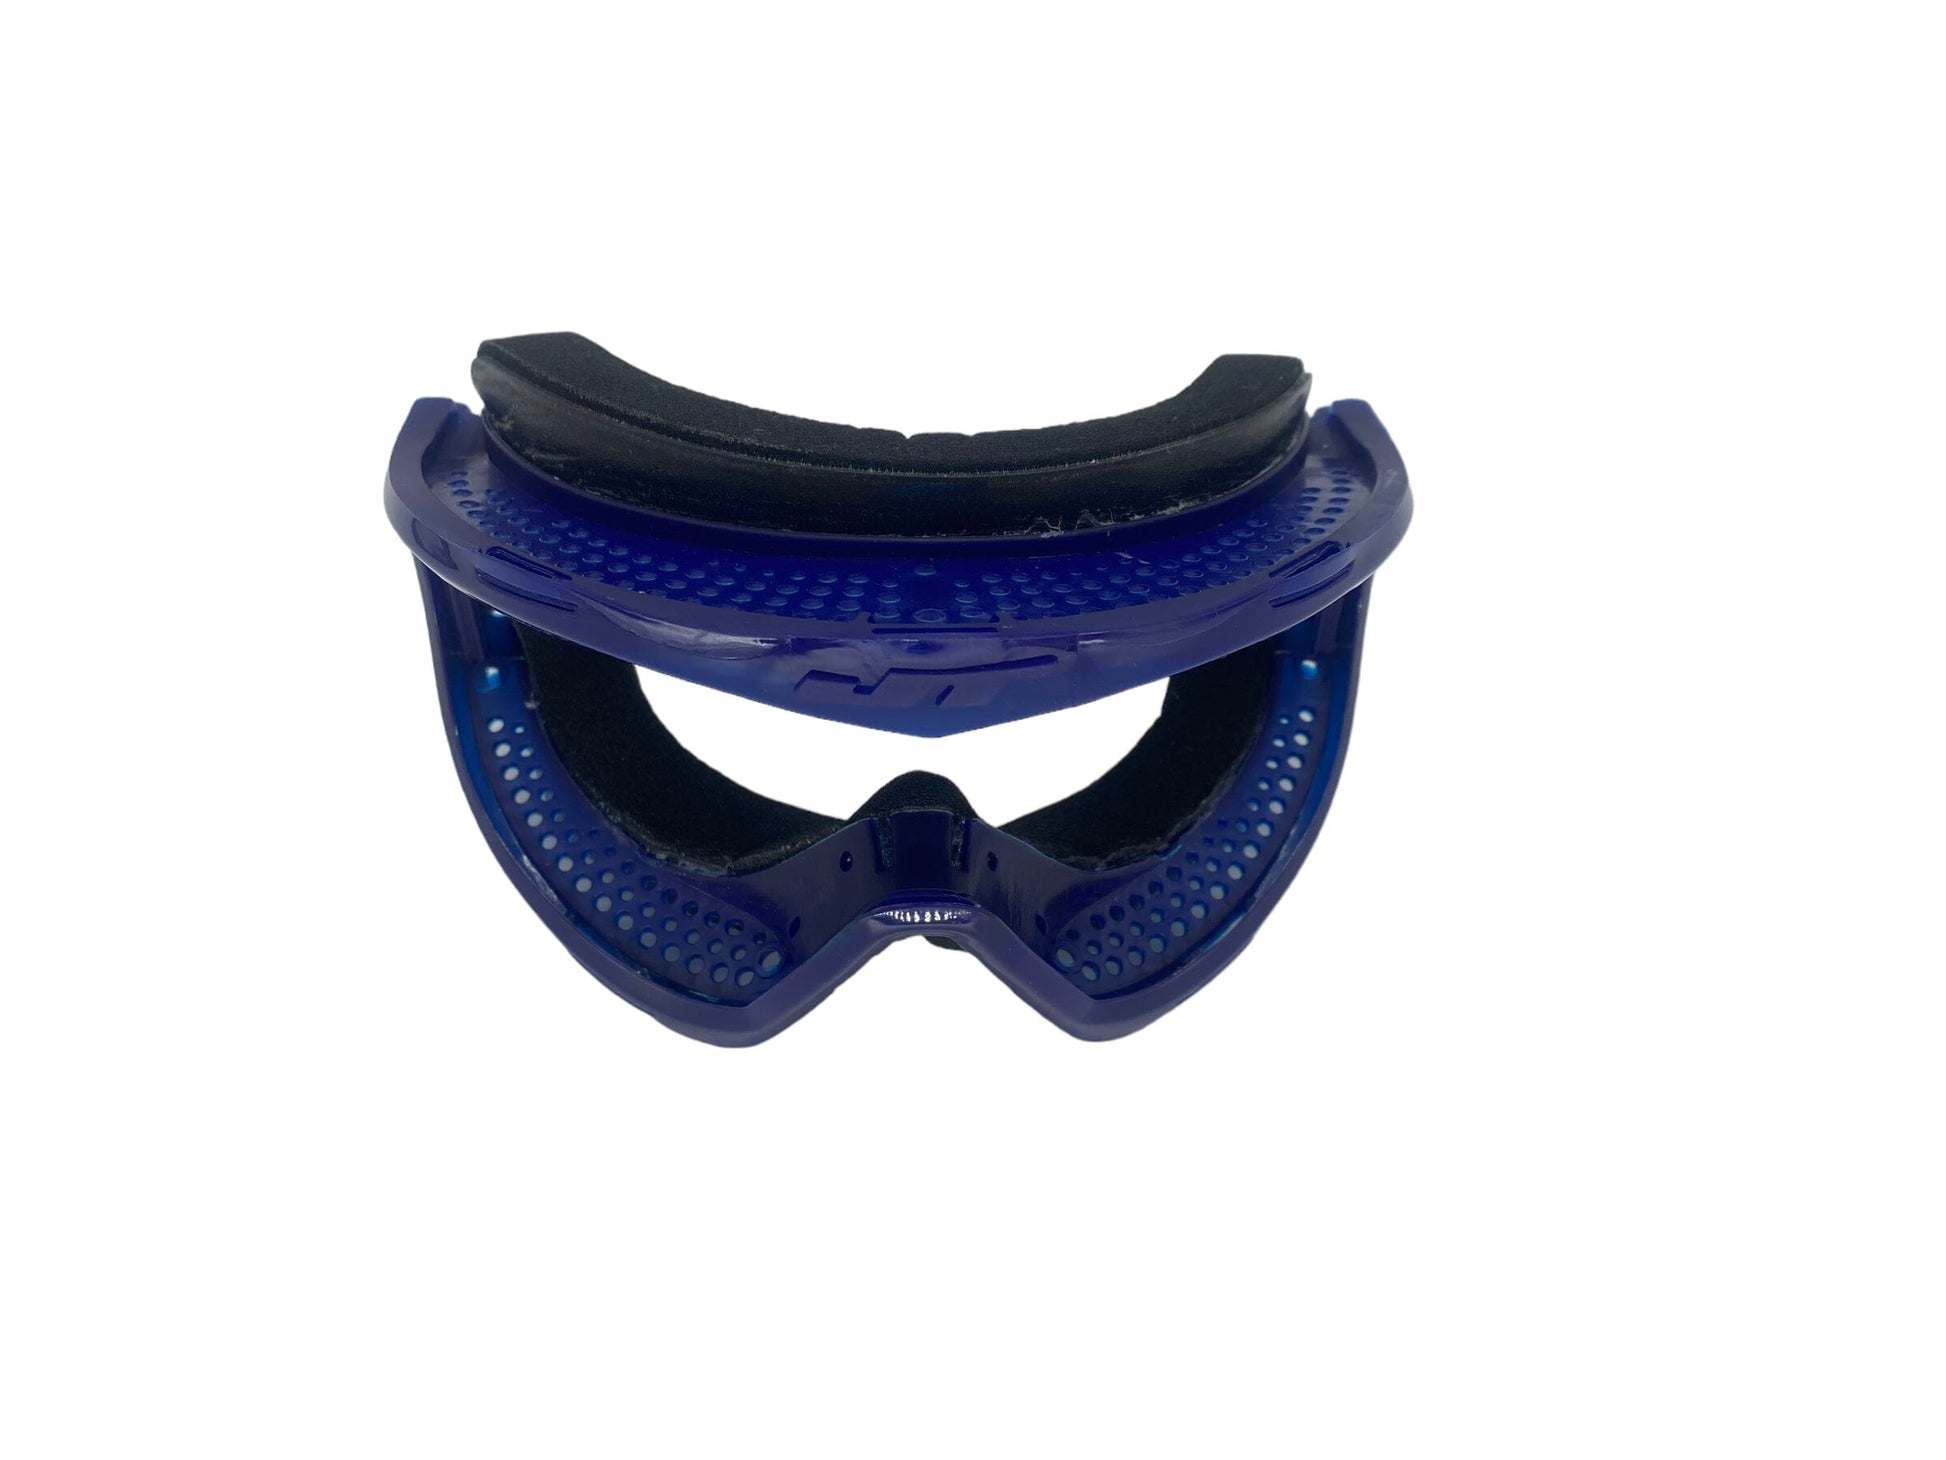 Used Jt Proflex Frames Goggles Mask Paintball Gun from CPXBrosPaintball Buy/Sell/Trade Paintball Markers, Paintball Hoppers, Paintball Masks, and Hormesis Headbands